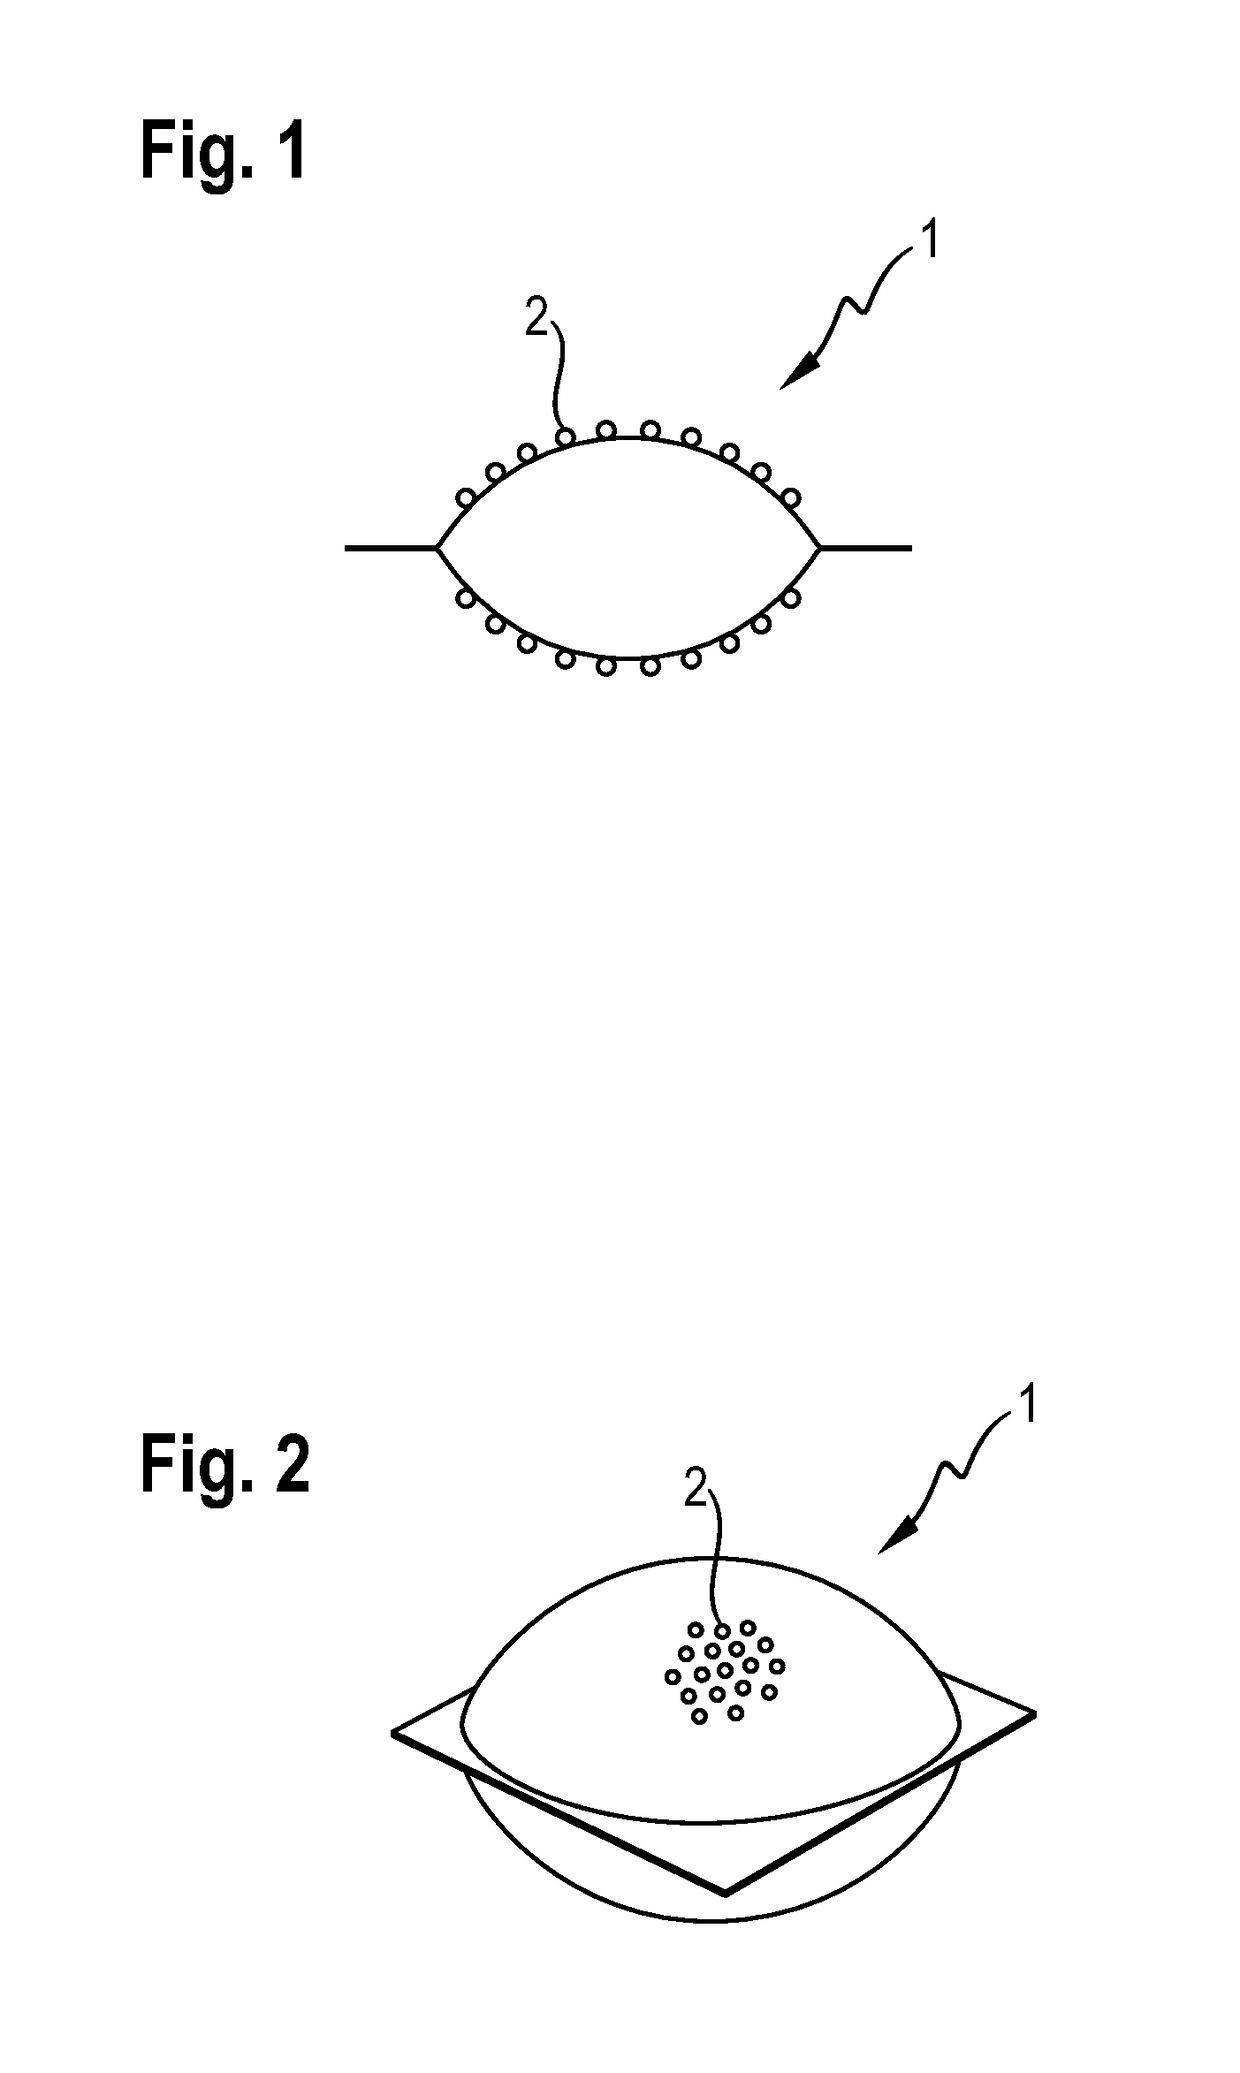 Water soluble unit dose article comprising an aversive agent